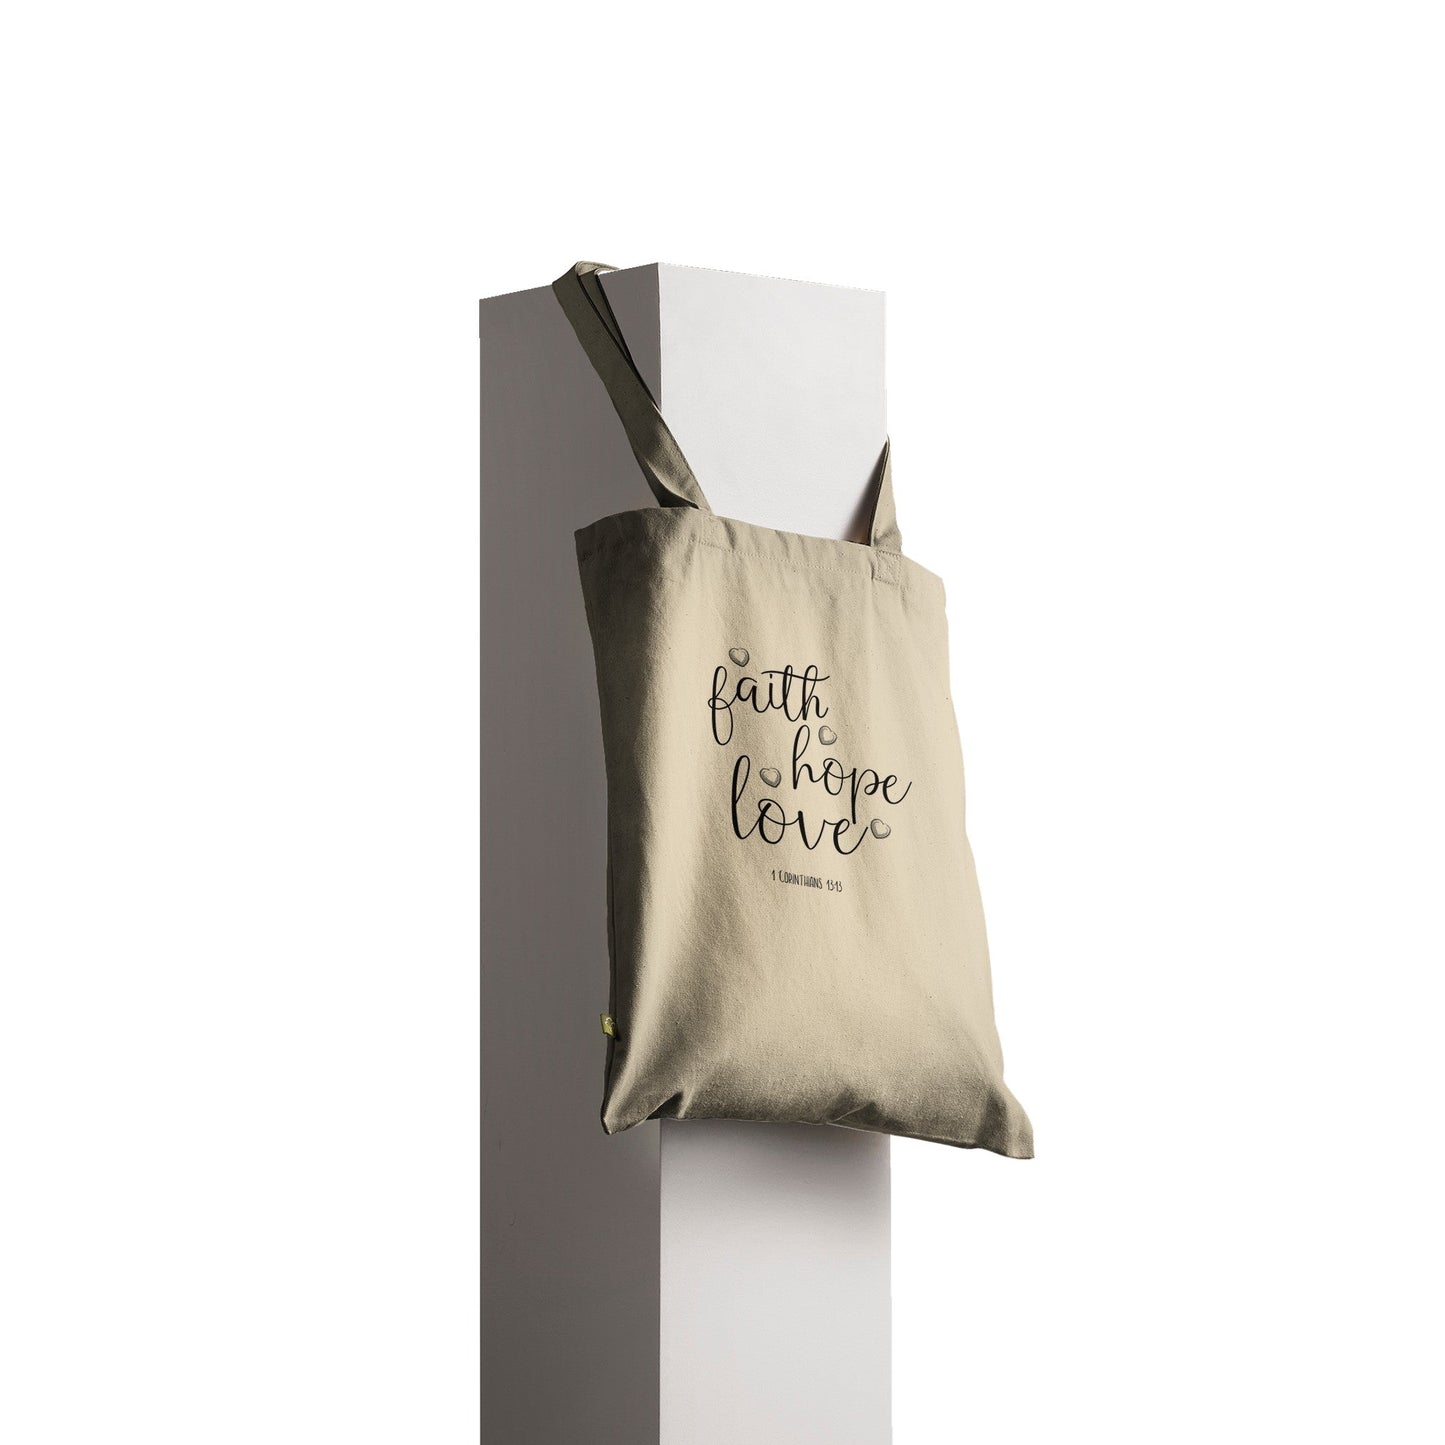 Faith Hope Love Premium Tote Bag - Dolly and Fred Designs